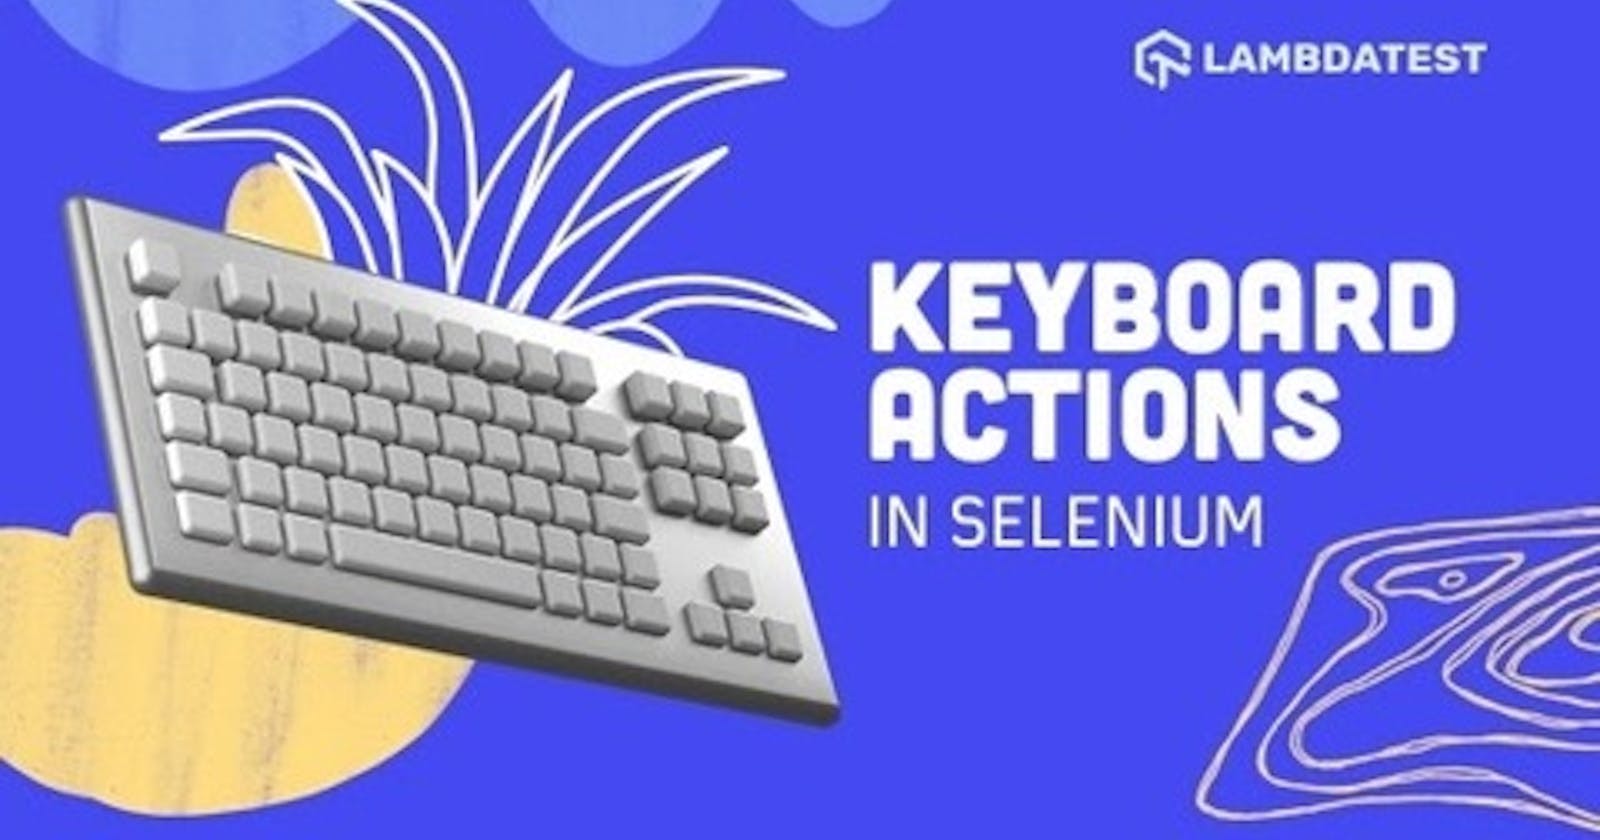 Tutorial On Handling Keyboard Actions In Selenium WebDriver [With Example]